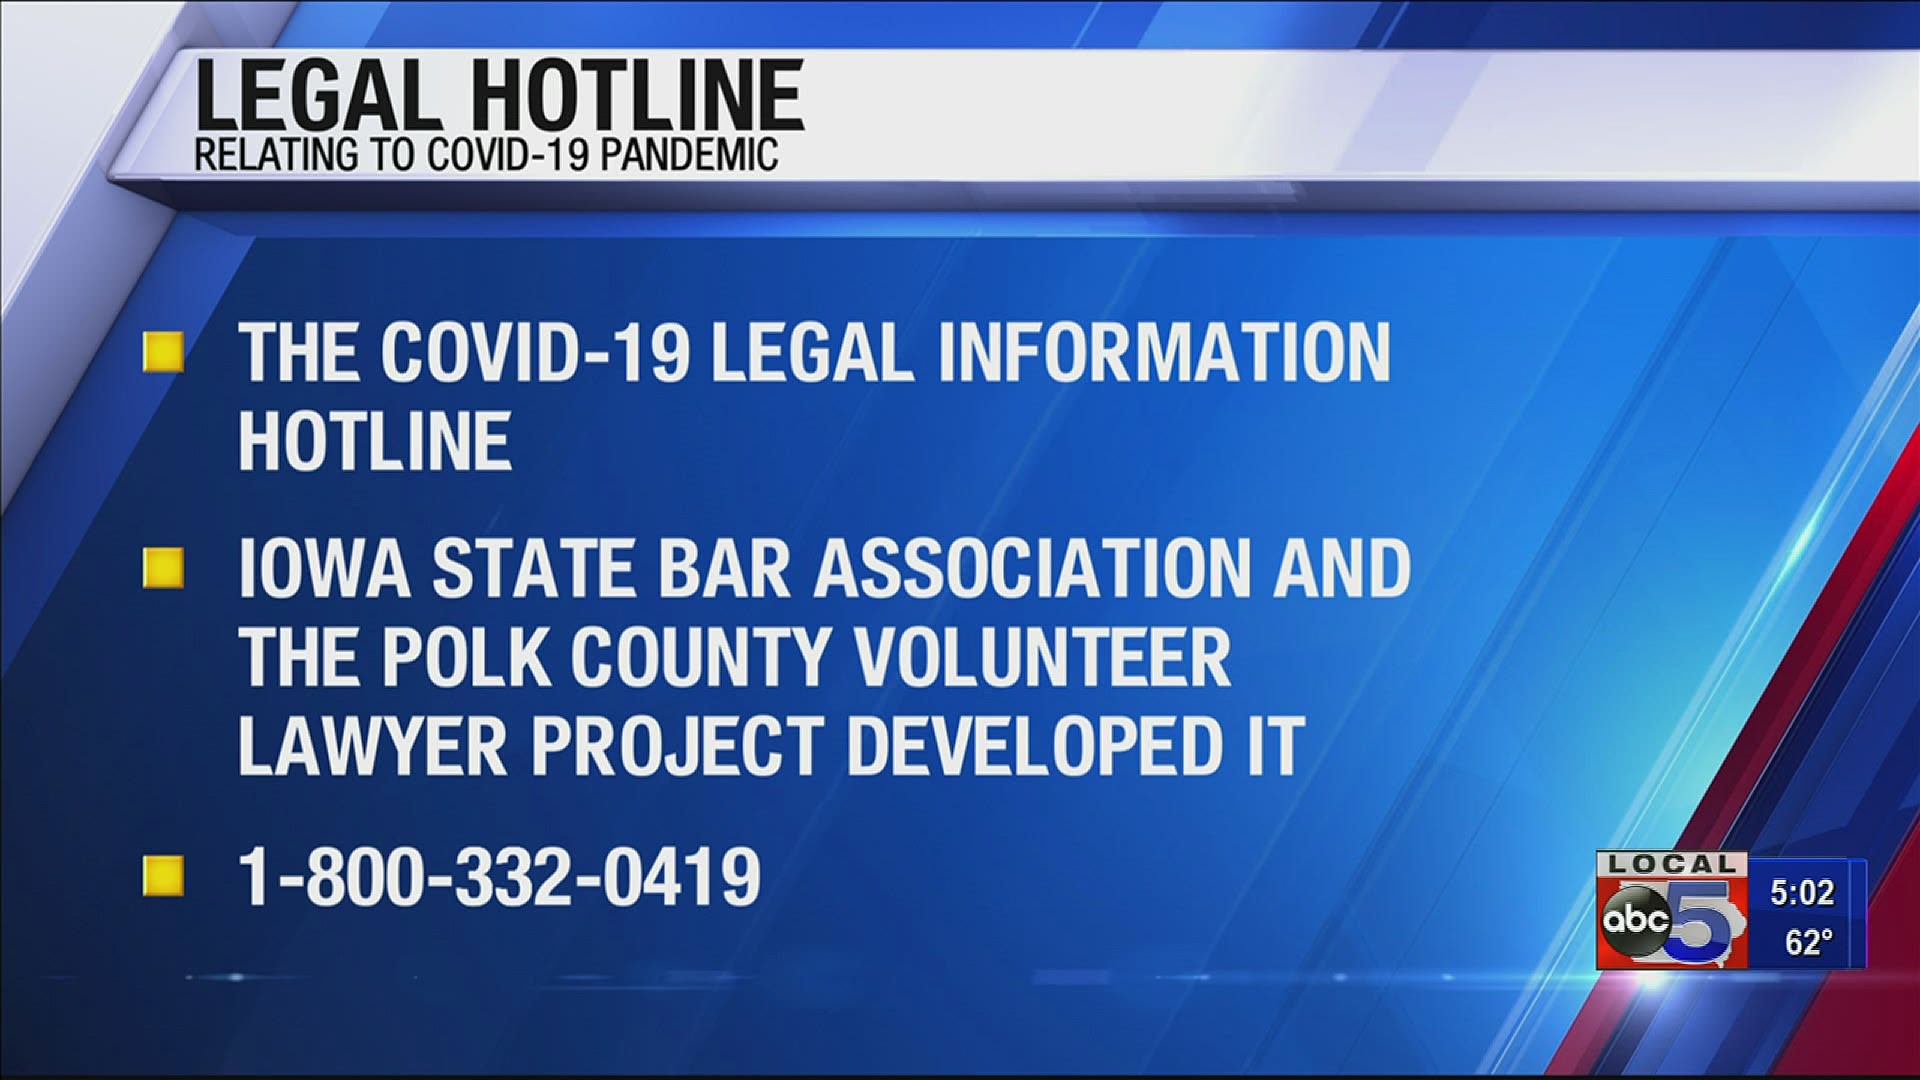 This hotline is available for Iowans with legal questions relating to the COVID-19 pandemic.